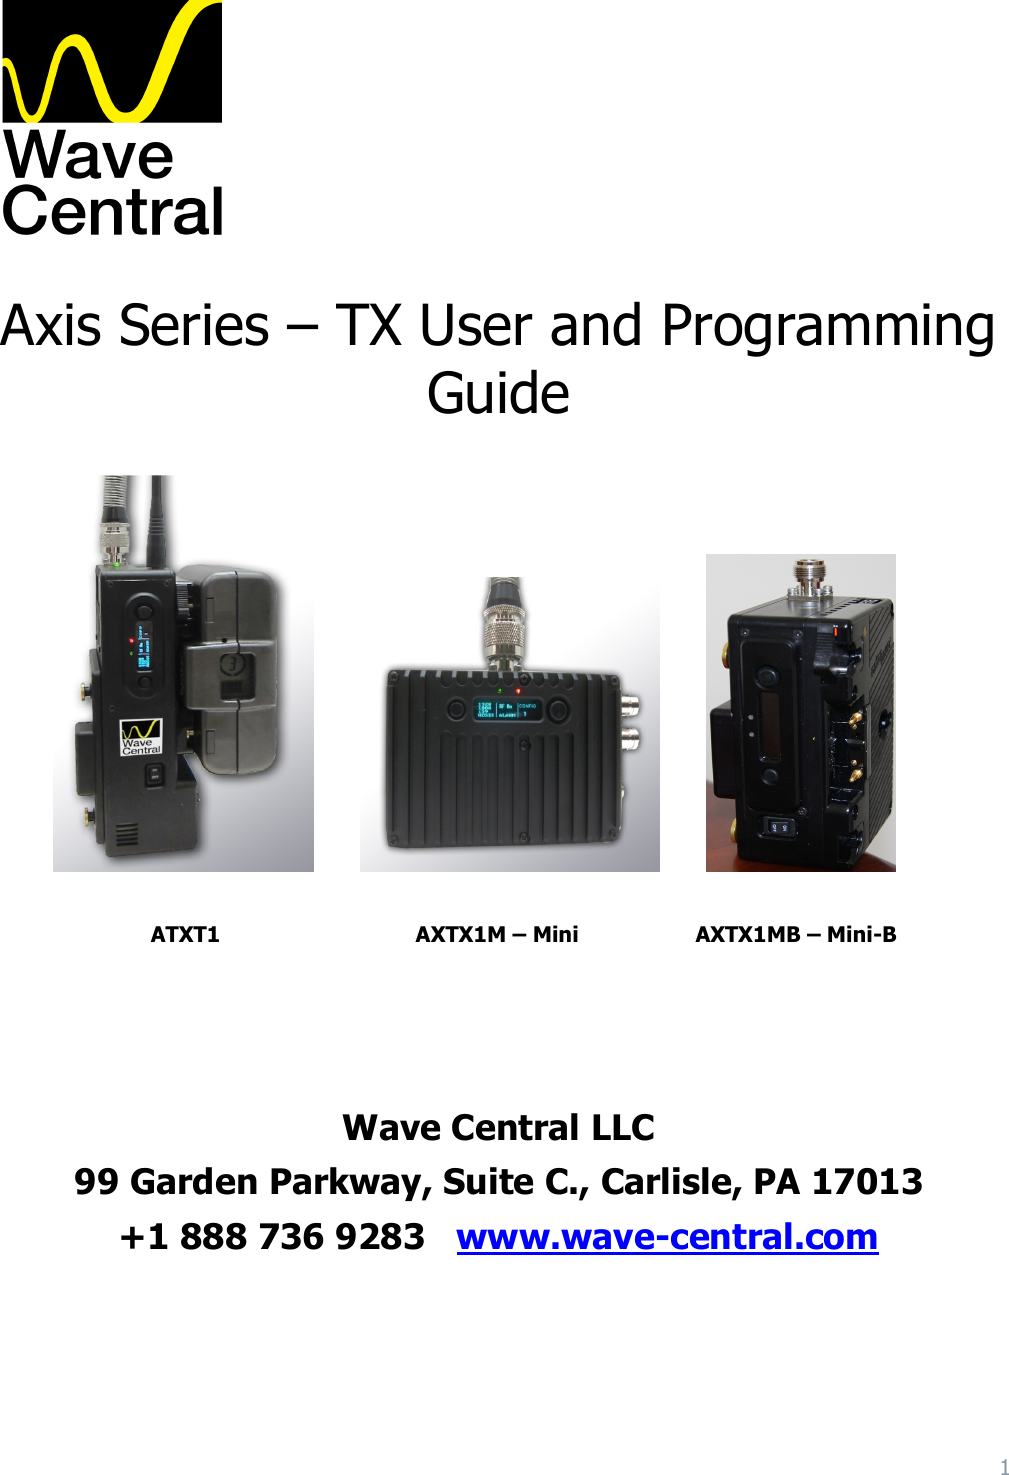 1    Axis Series – TX User and Programming Guide                                                         ATXT1                               AXTX1M – Mini                 AXTX1MB – Mini-B     Wave Central LLC 99 Garden Parkway, Suite C., Carlisle, PA 17013 +1 888 736 9283   www.wave-central.com    